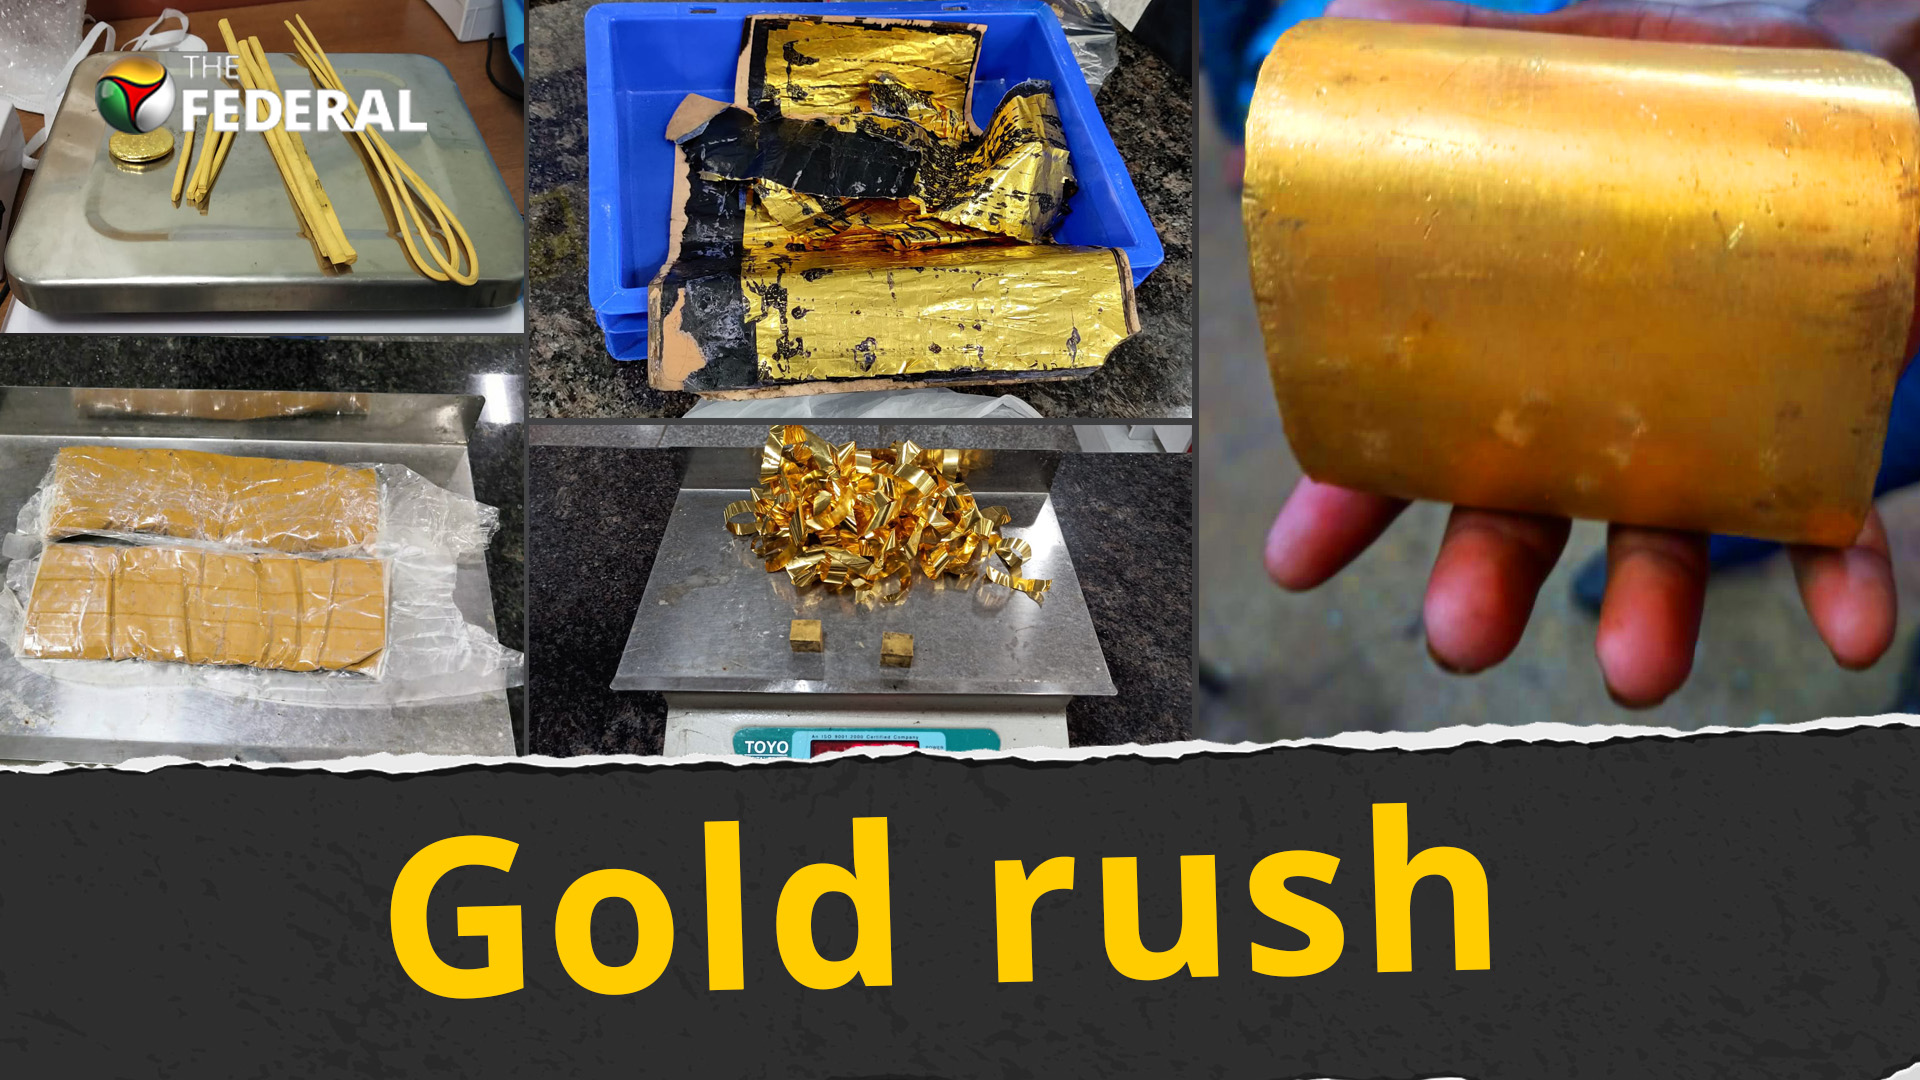 Gold rush: Innovative ways of gold smuggling in Kerala